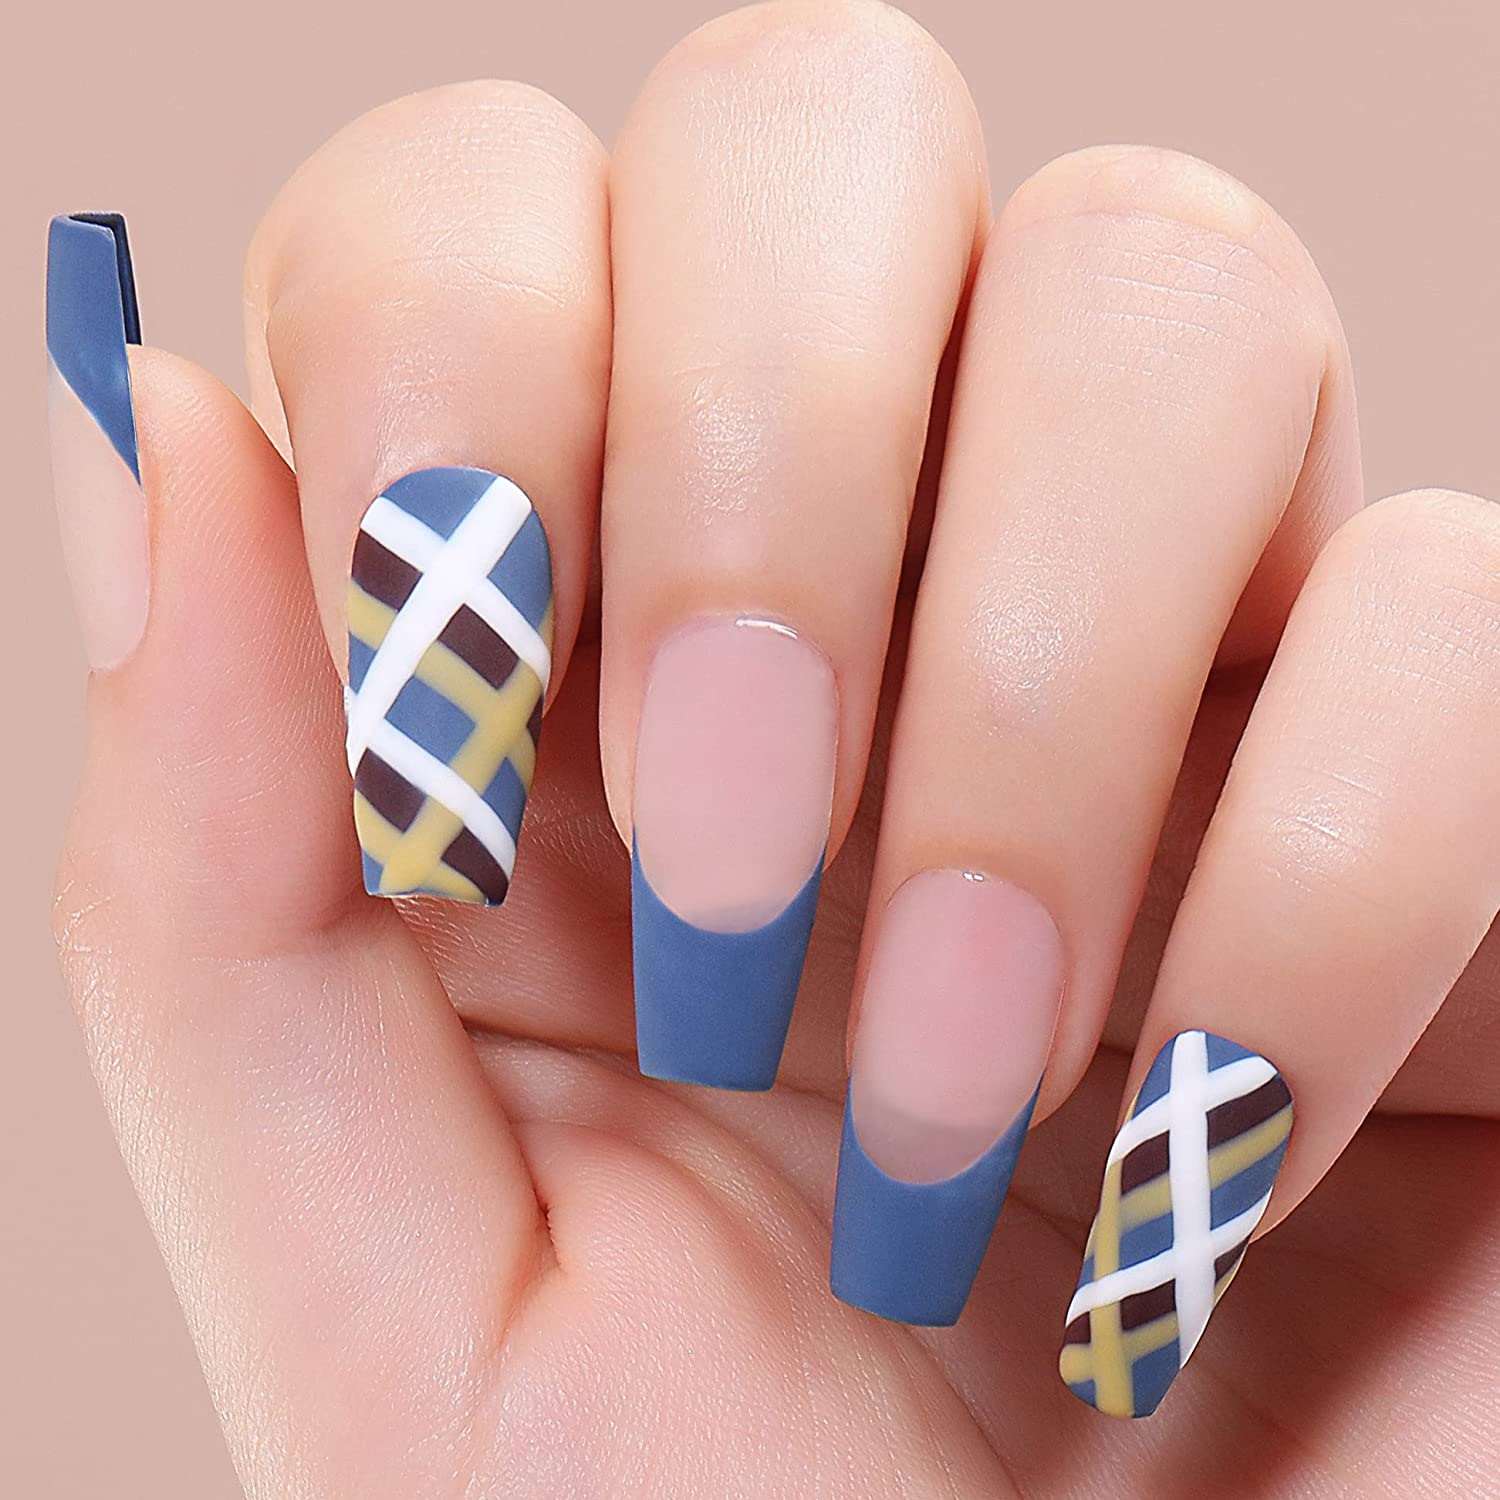 65+ Blue Nails With Designs + the Best Tutorials - The Mood Guide